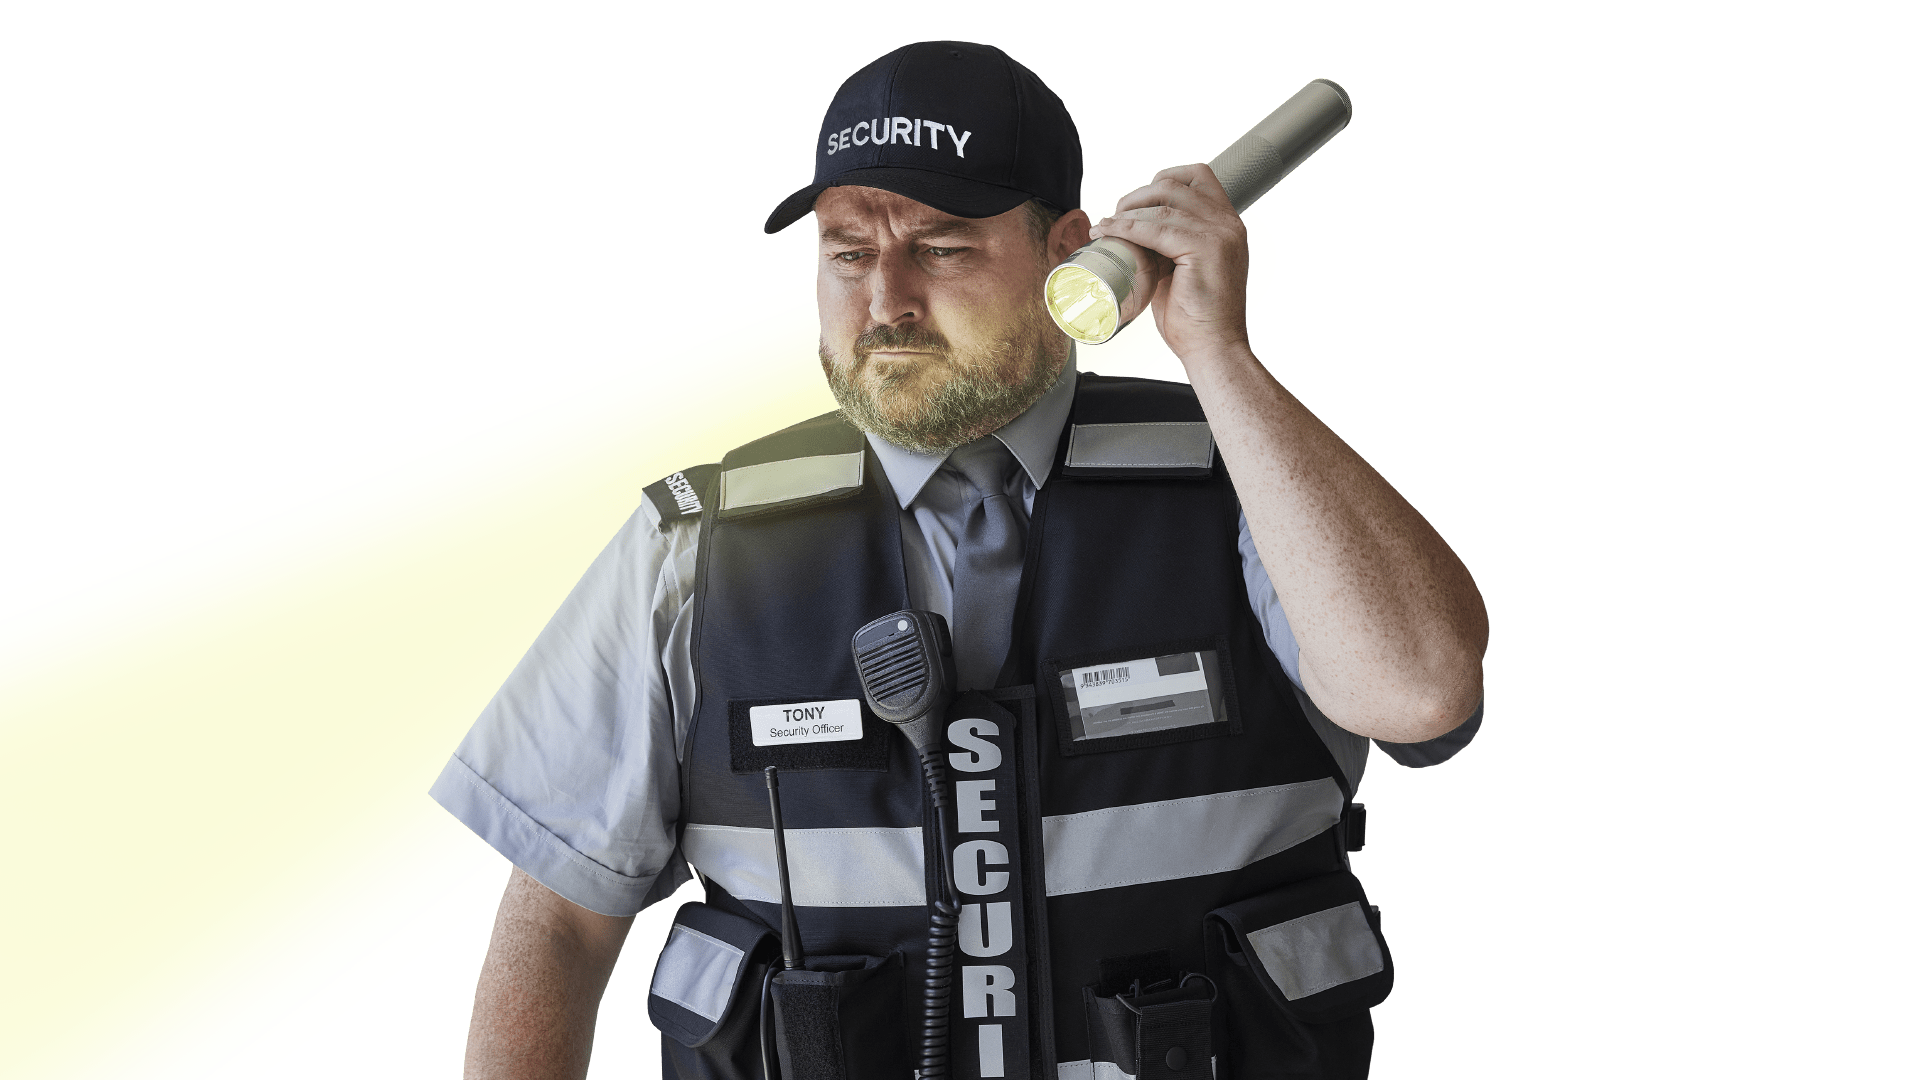 Tony Prowler Proof security guard with flashlight